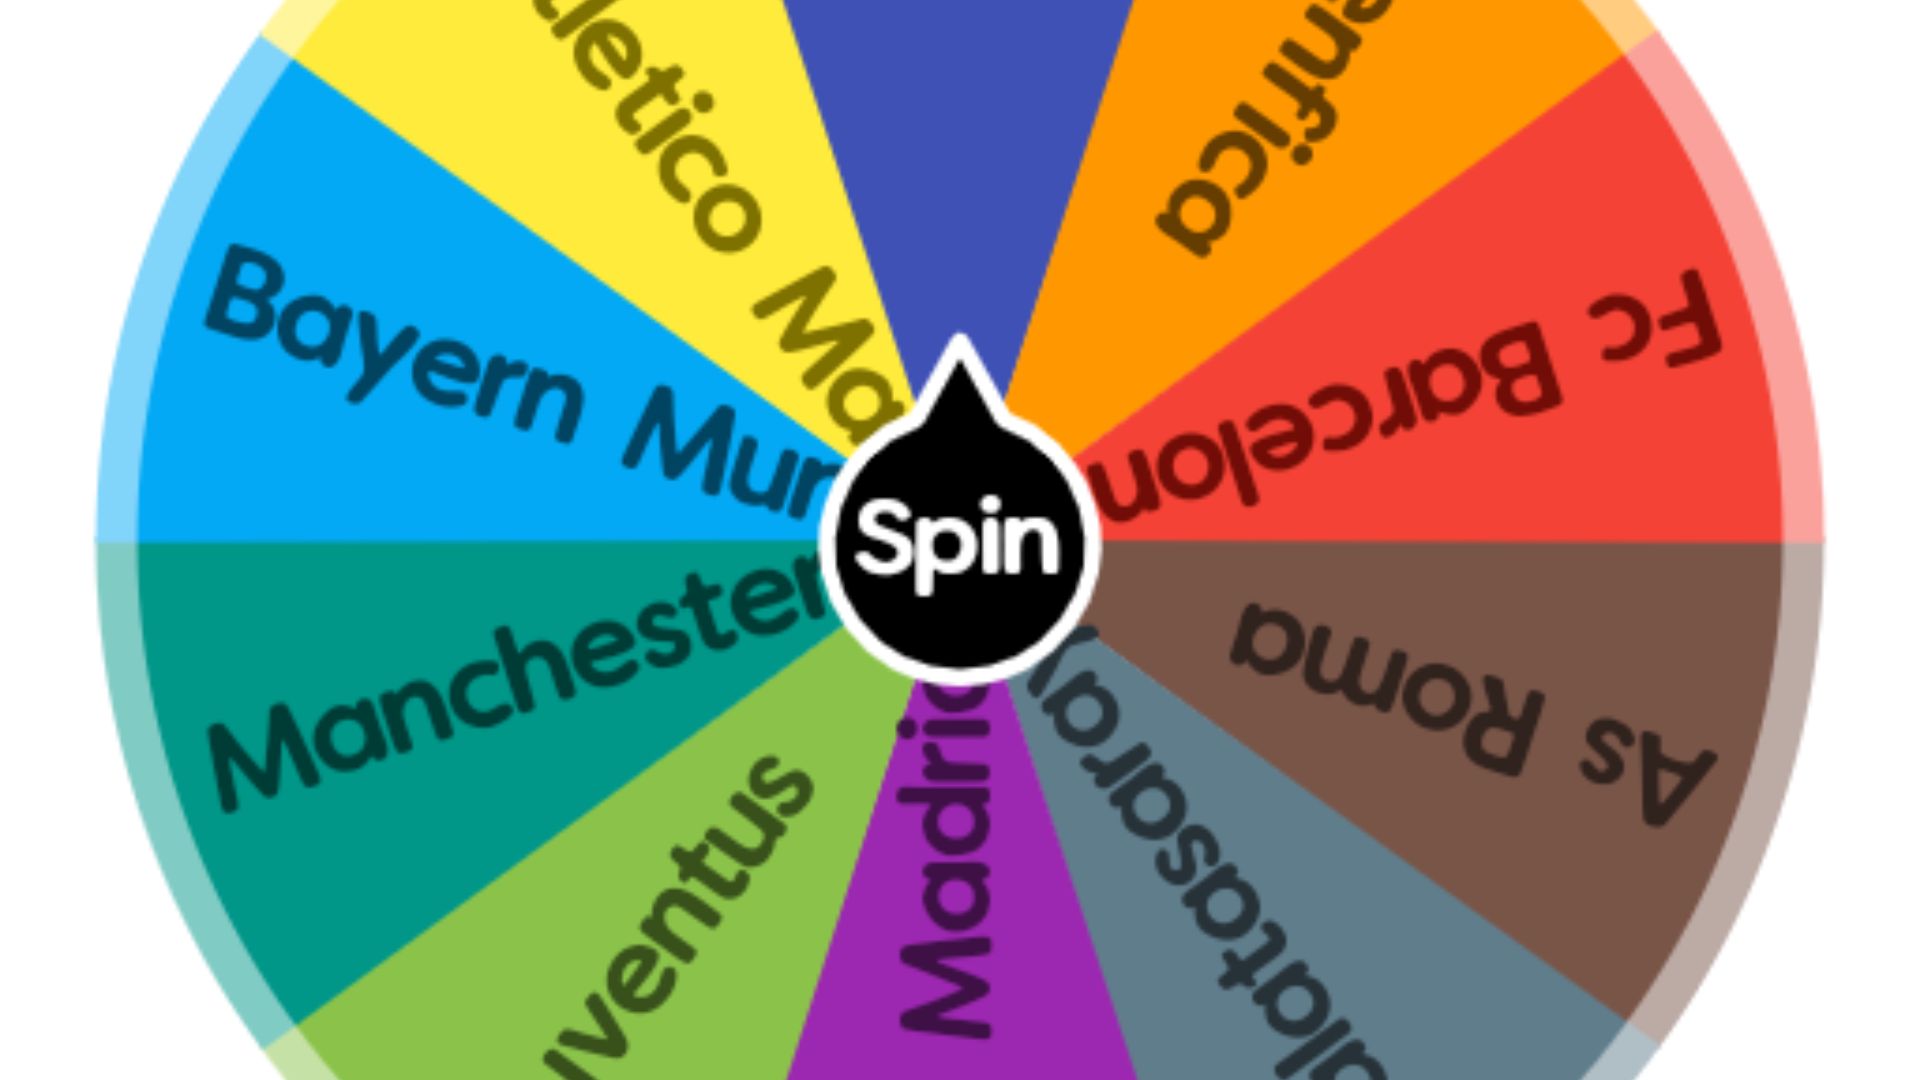 this picture shows Spin Wheel for Football Clubs